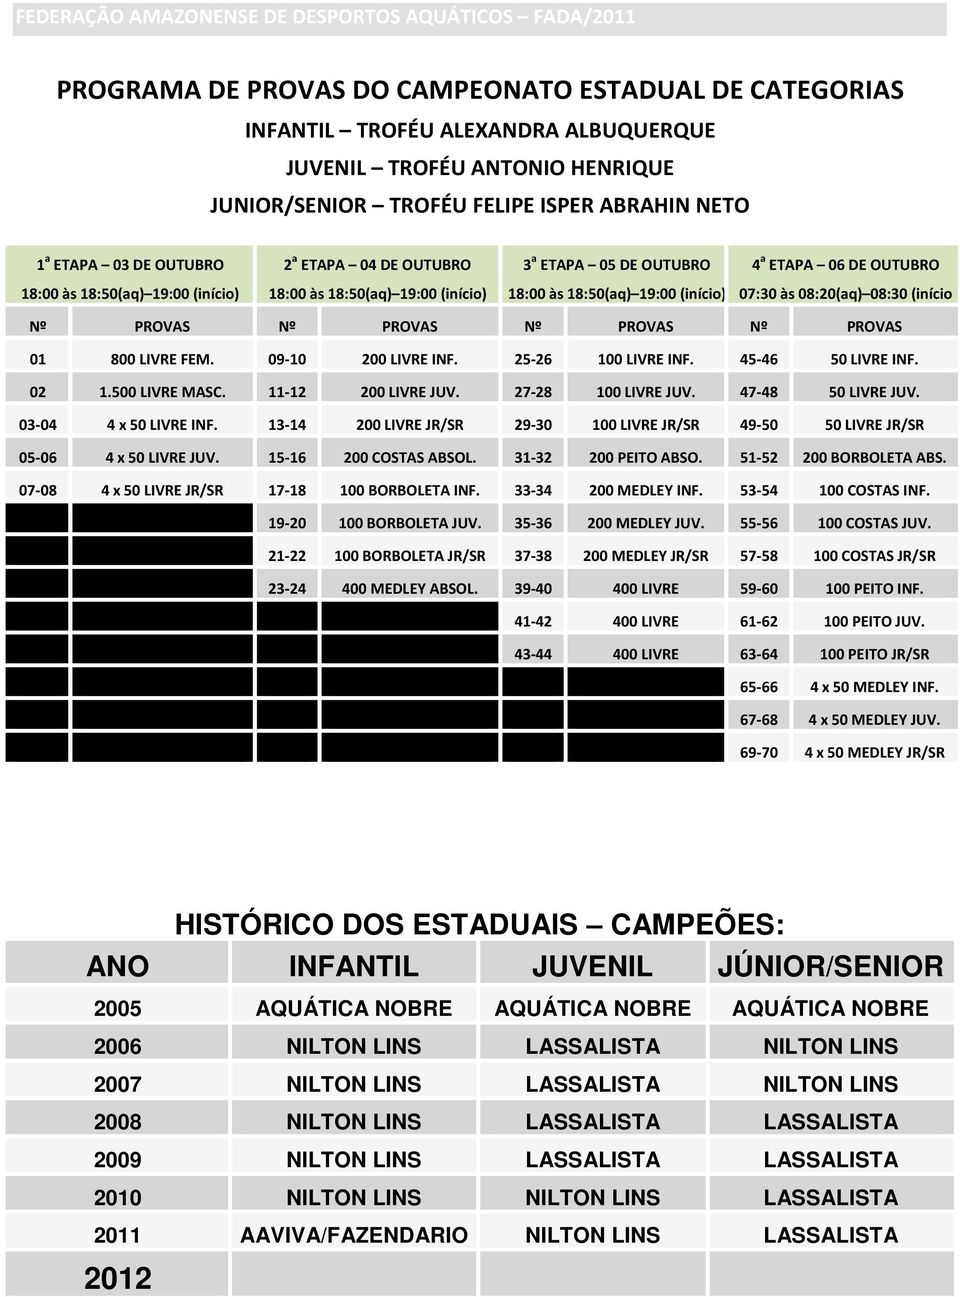 PROVAS 01 800 LIVRE FEM. 09-10 200 LIVRE INF. 25-26 100 LIVRE INF. 45-46 50 LIVRE INF. 02 1.500 LIVRE MASC. 11-12 200 LIVRE JUV. 27-28 100 LIVRE JUV. 47-48 50 LIVRE JUV. 03-04 4 x 50 LIVRE INF.